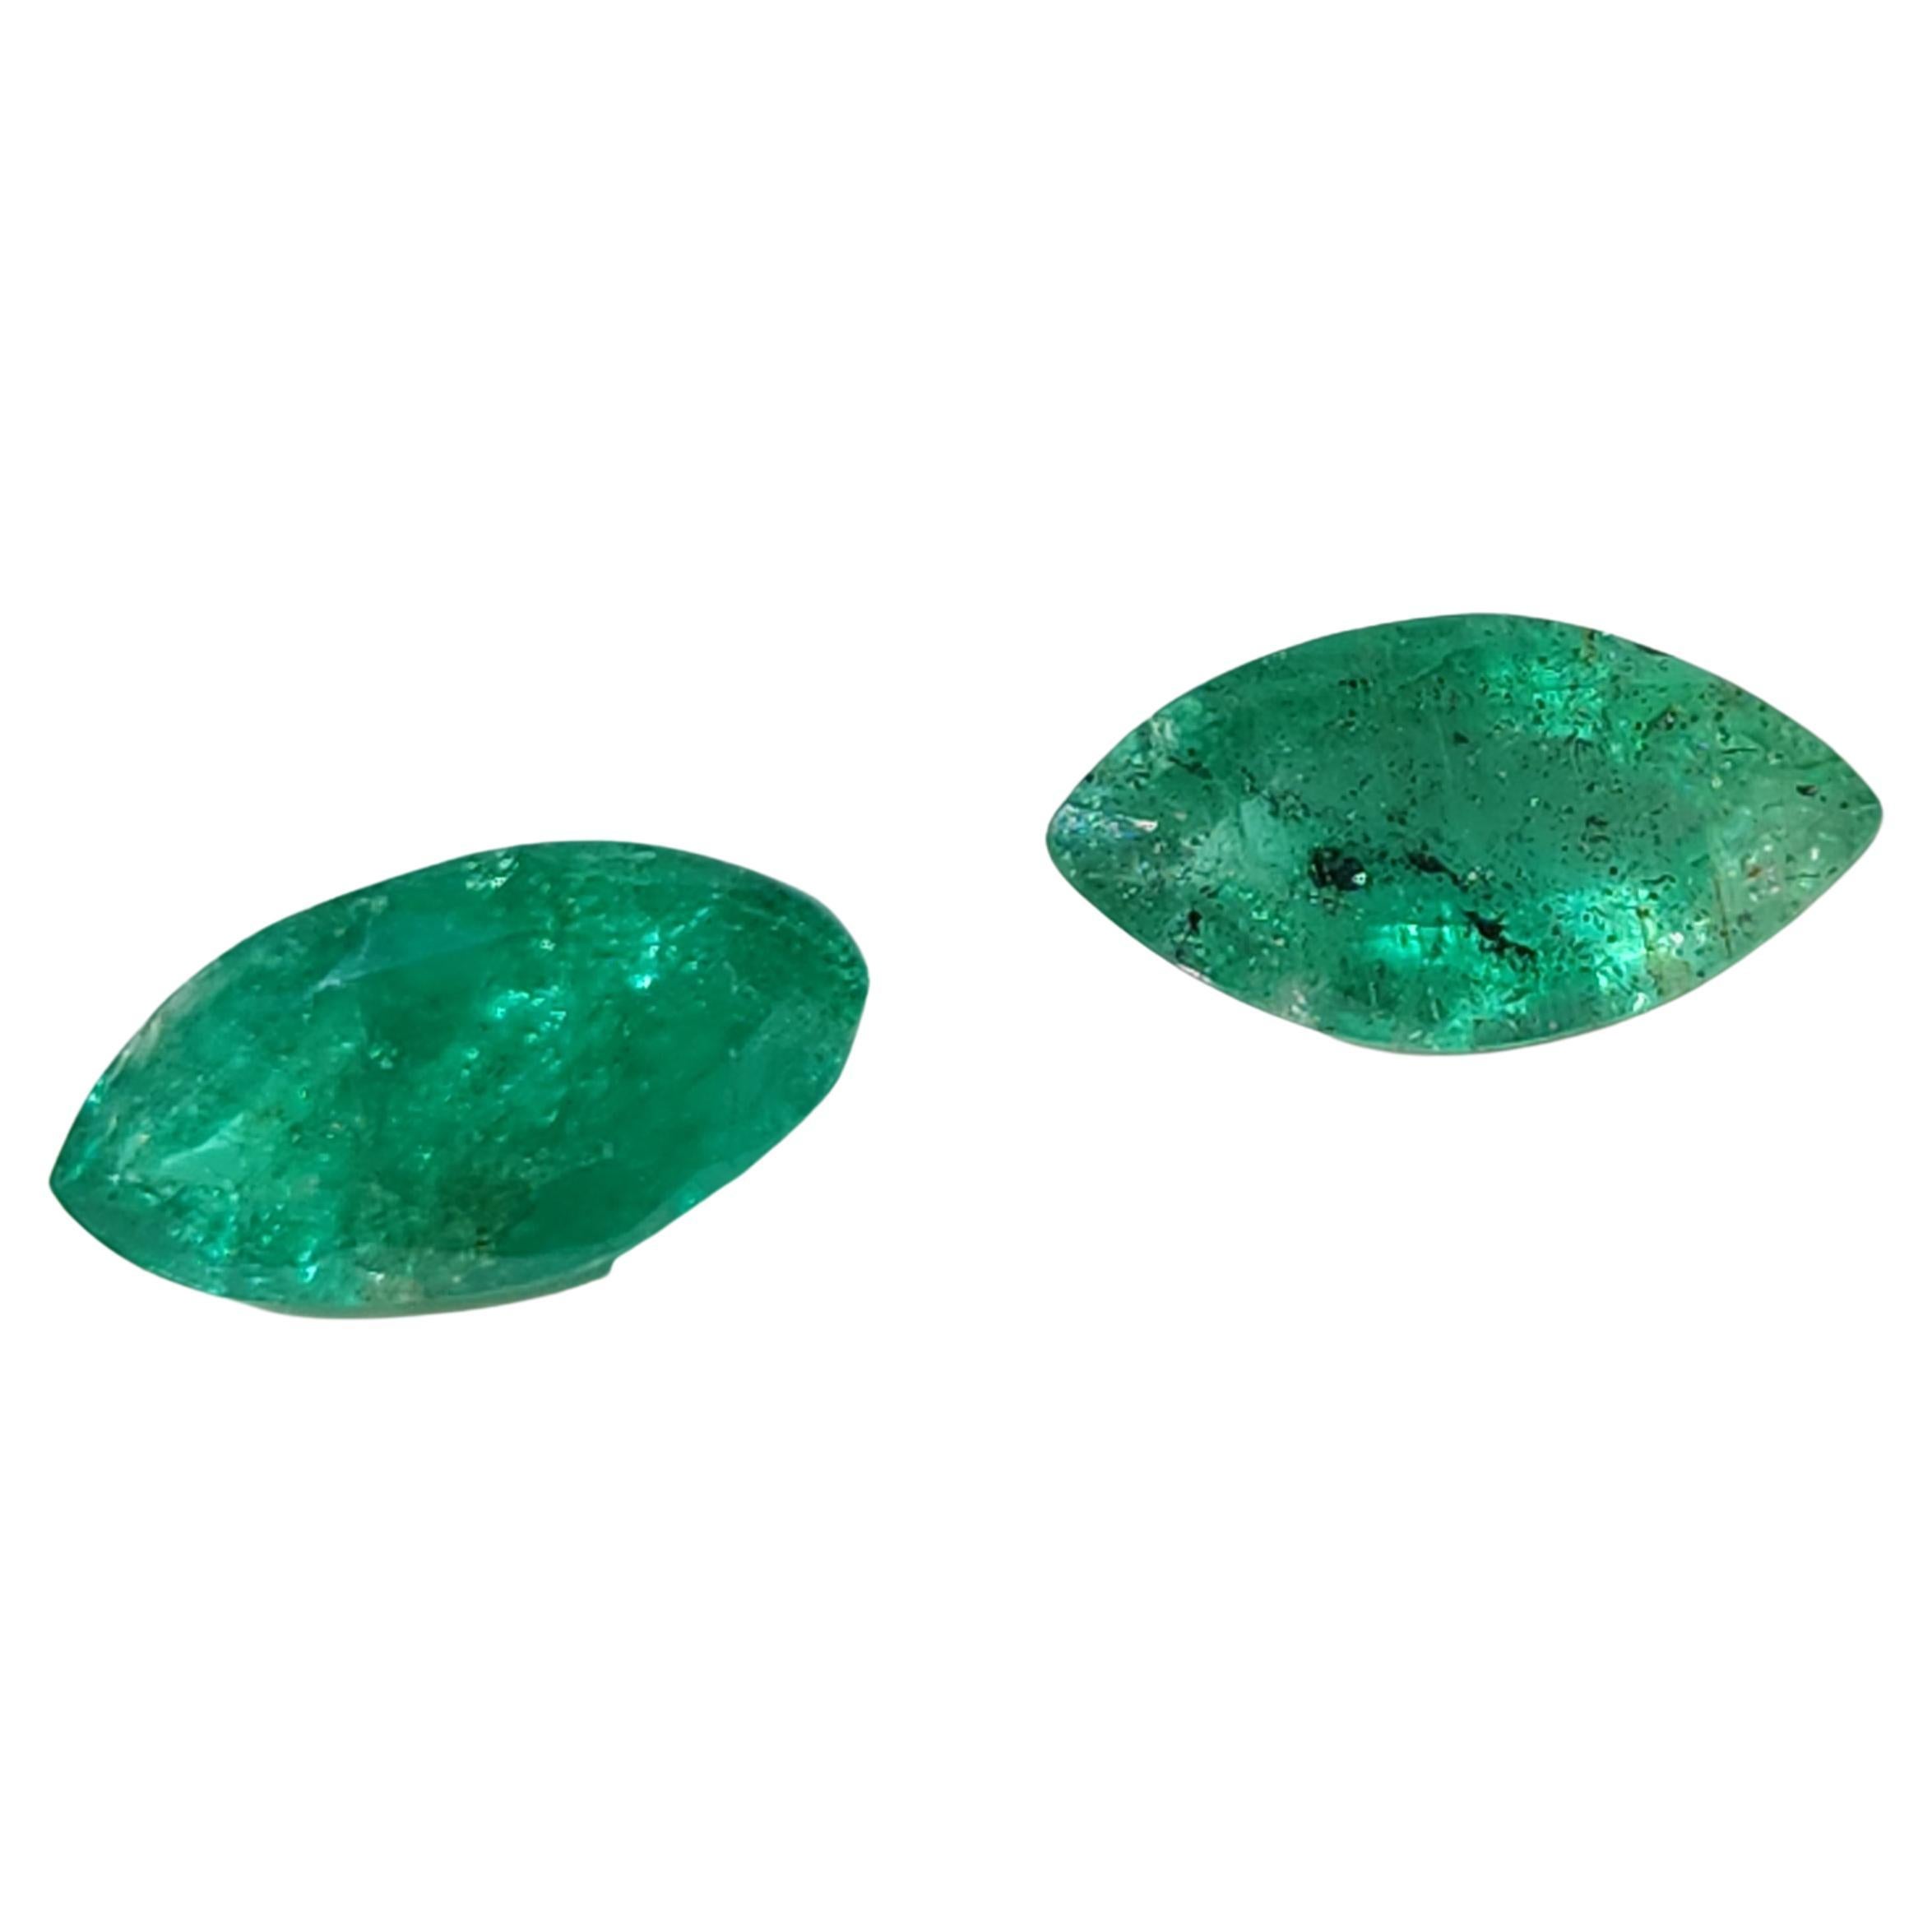 Title: Exquisite 1.40ct Loose Marquise Shape Colombian Emerald Gemstone

Product Description:

Presenting our exceptional 1.40ct loose Marquise Shape Colombian Emerald gemstone—a symbol of Colombia's rich gemological heritage and nature's